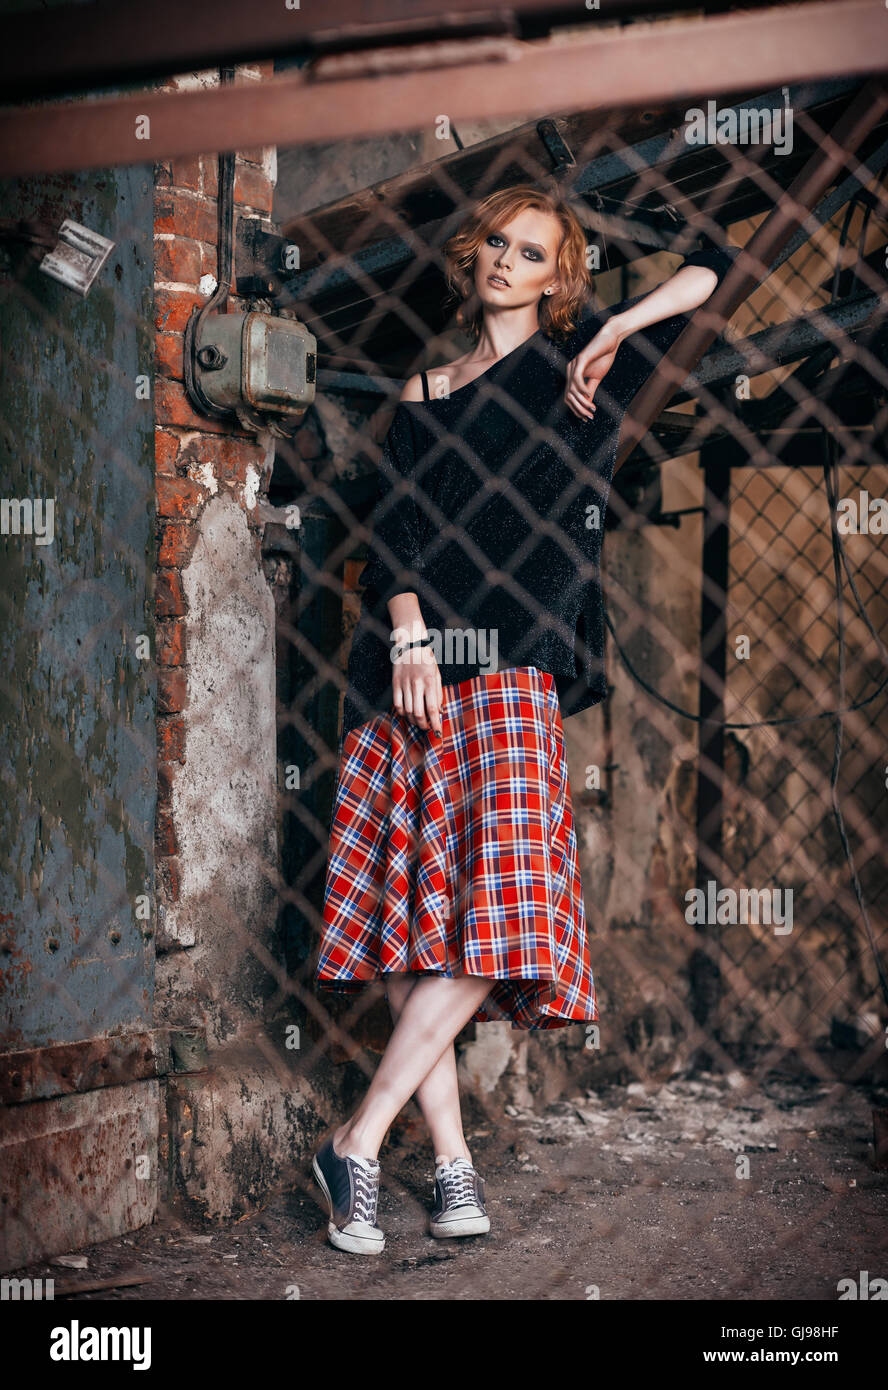 Portrait of a beautiful grunge girl in plaid skirt and sweater standing behind metallic lattice Stock Photo